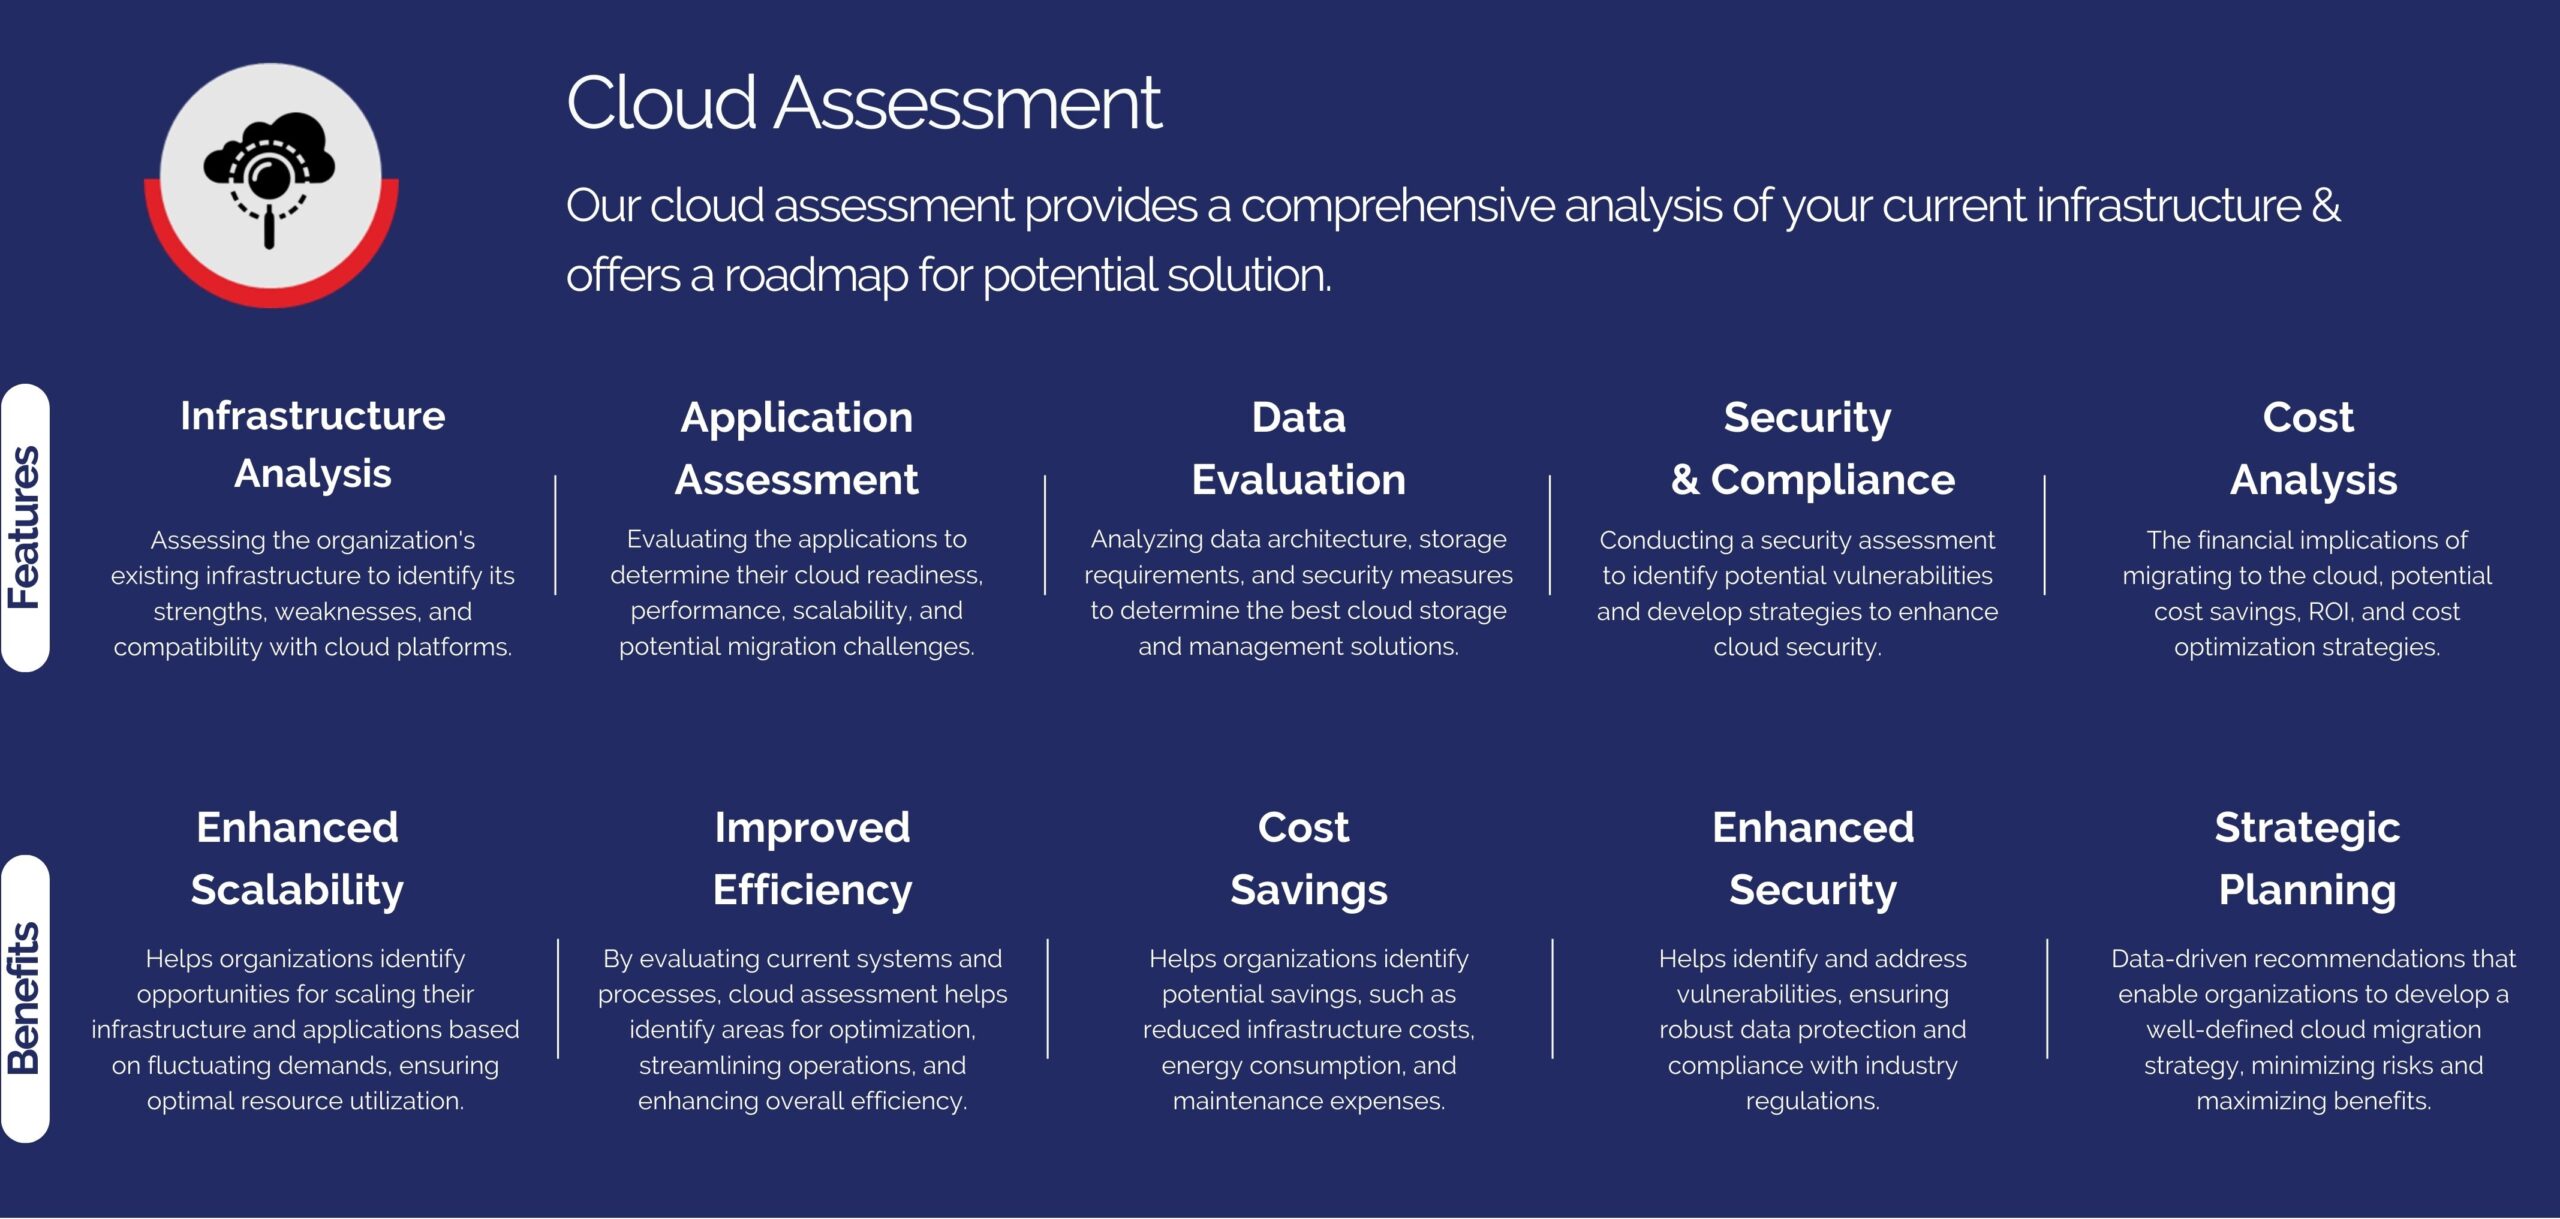 Cloud Assessment - "Cloud Assessments Our cloud assessment provides a comprehensive analysis of your current infrastructure and offers a roadmap for potential solutions." Features Benefits Infrastructure Analysis Enhanced Scalability Application Assessment Improved Efficiency Data Evaluation Cost Savings Security and Compliance Enhanced Security Cost Analysis Strategic Planning